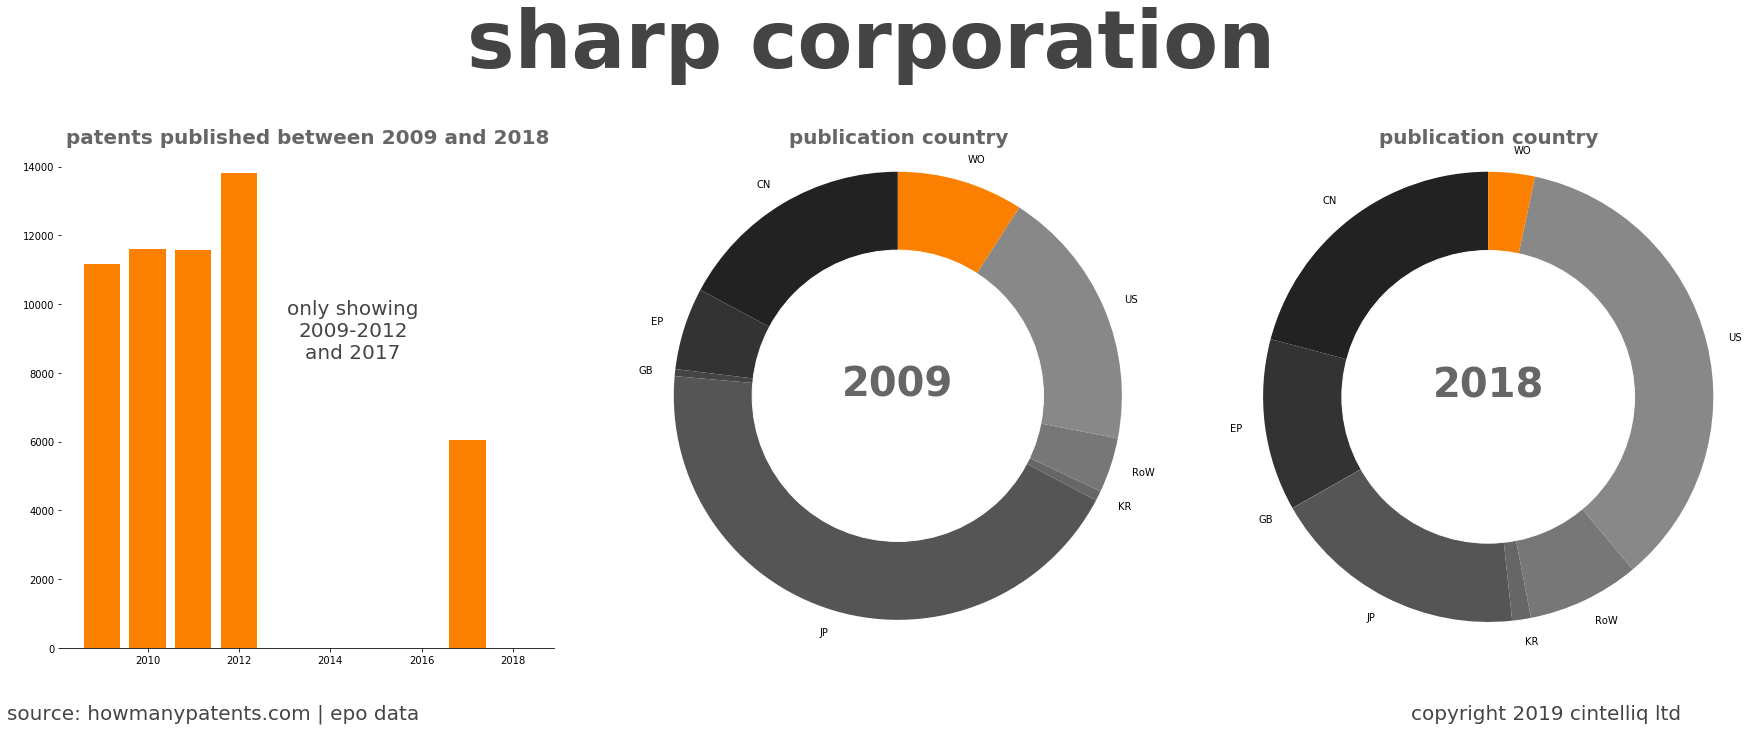 summary of patents for Sharp Corporation